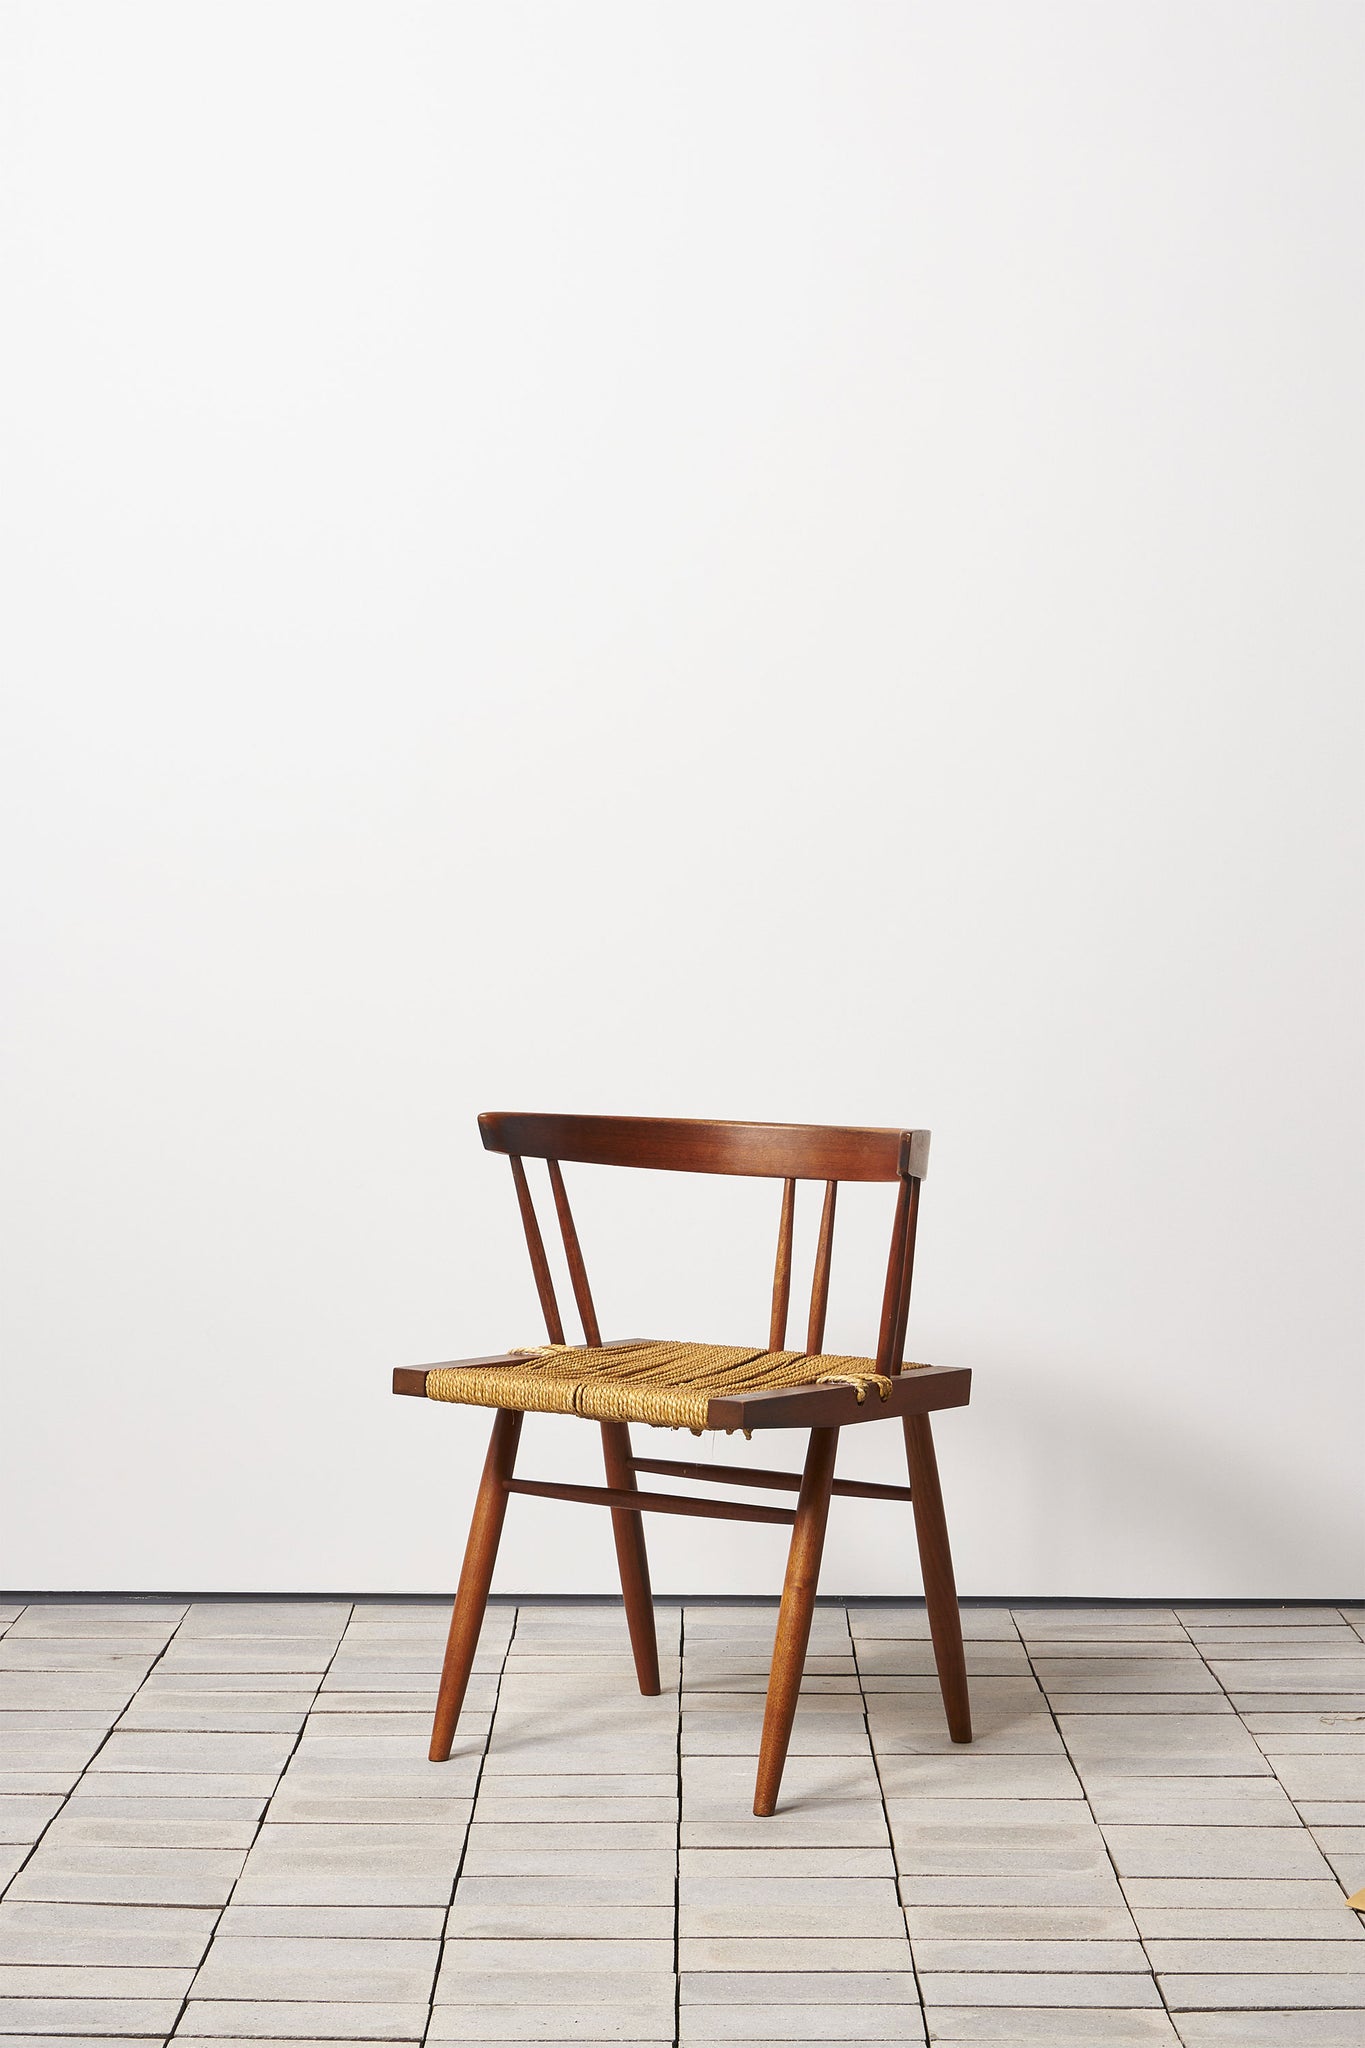 GRASS SEATED CHAIR C